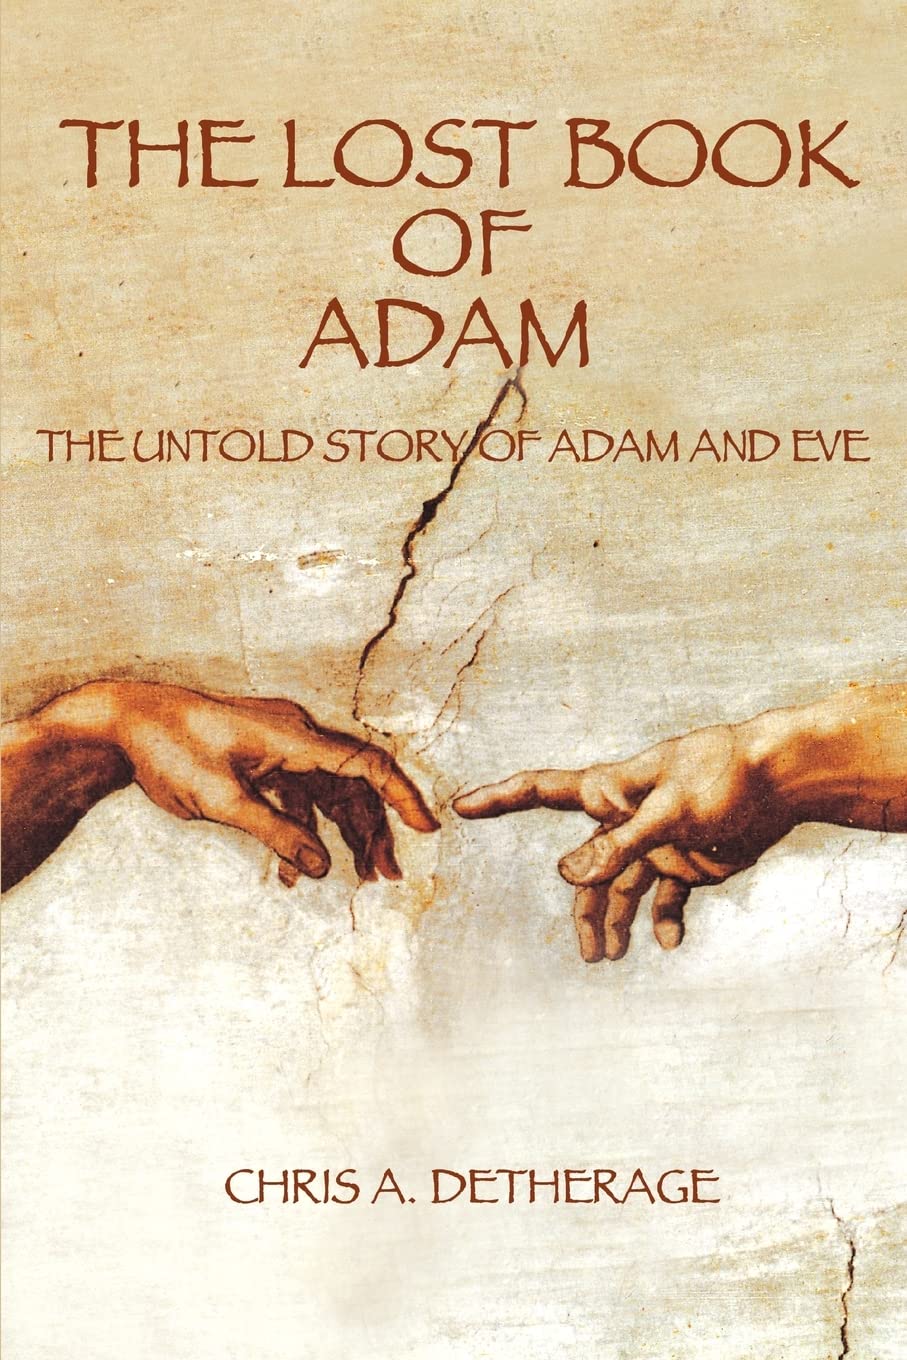 Mua The Lost Book of Adam: The Untold Story of Adam and Eve trên Amazon ...